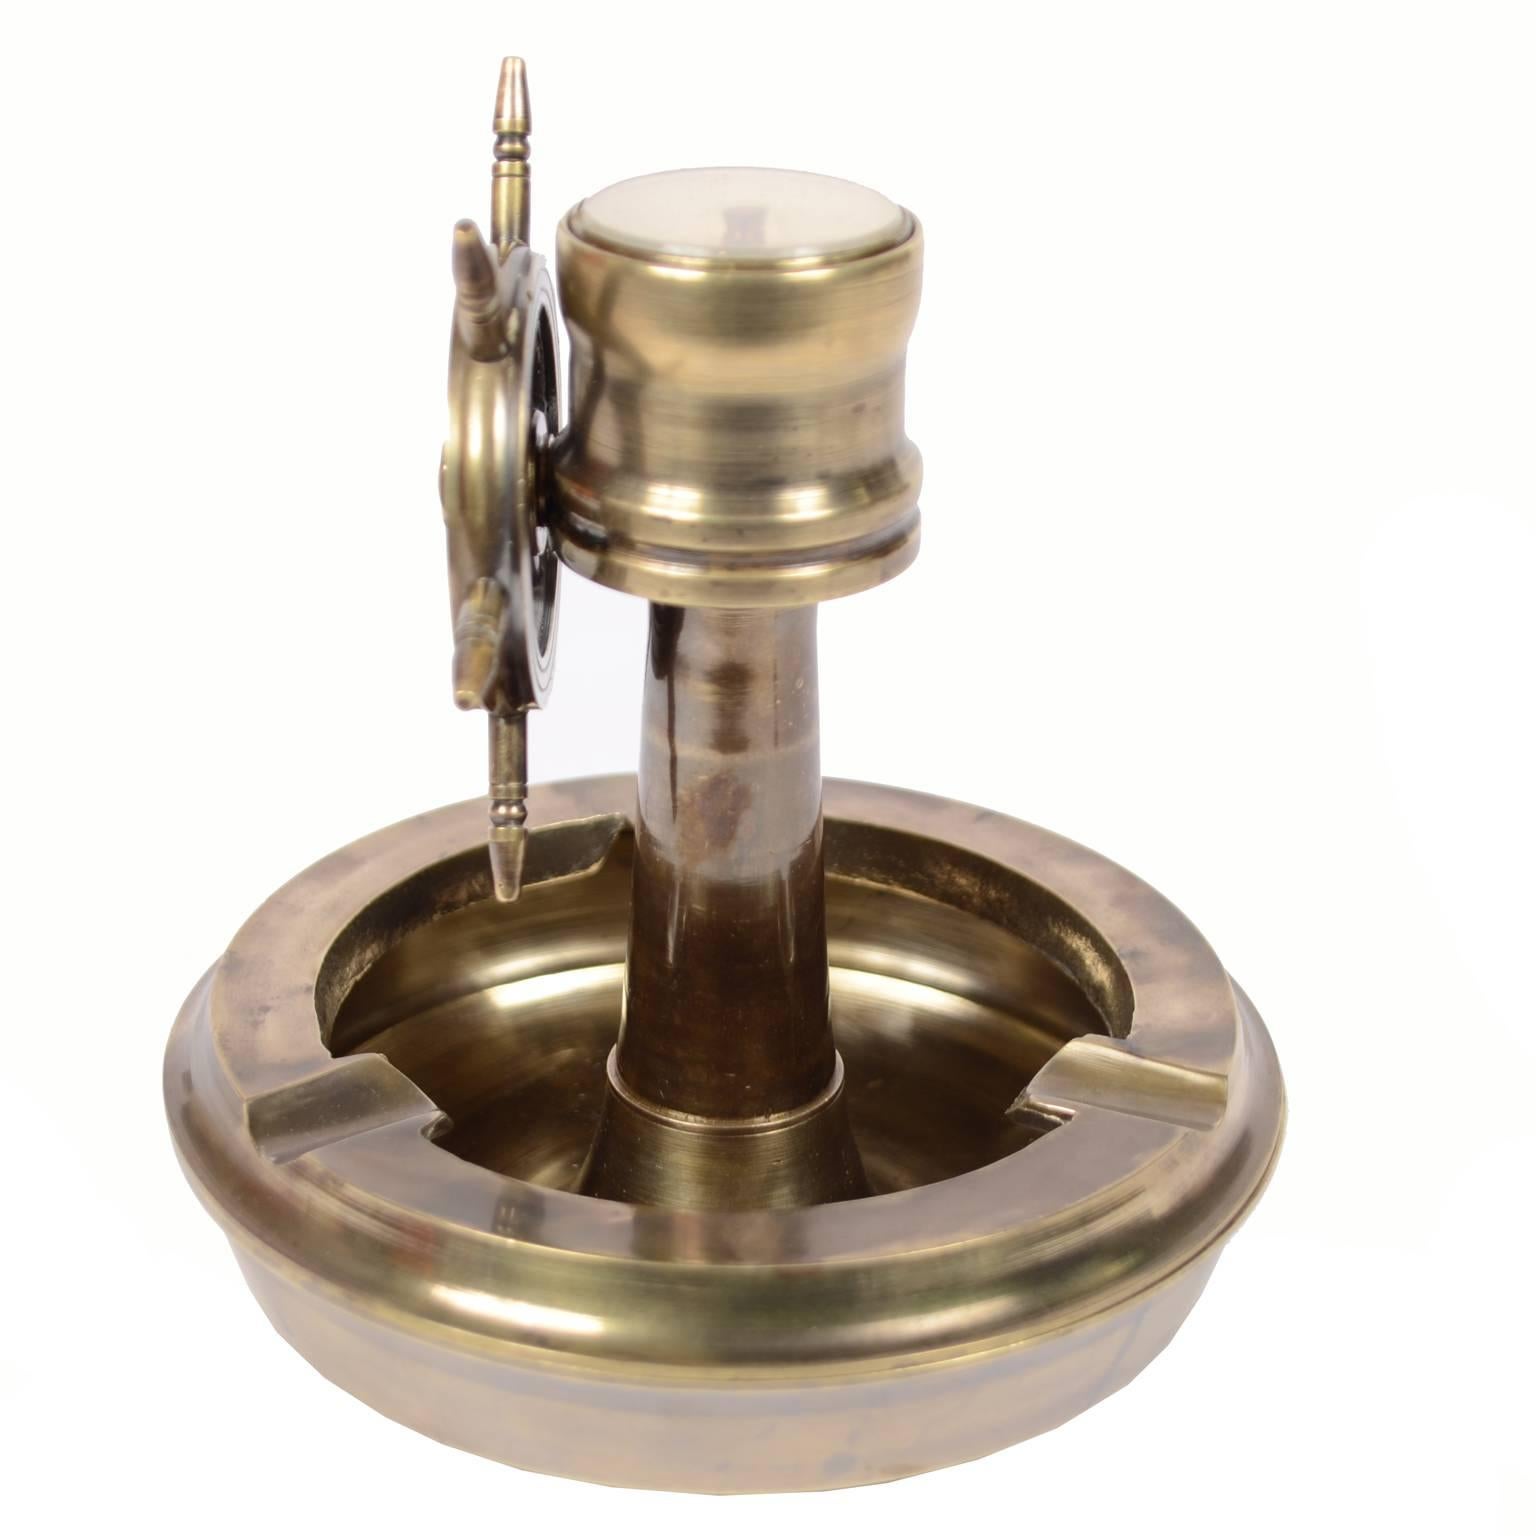 Mid-20th Century Brass Ashtray with Rudder and Compass, 1950s